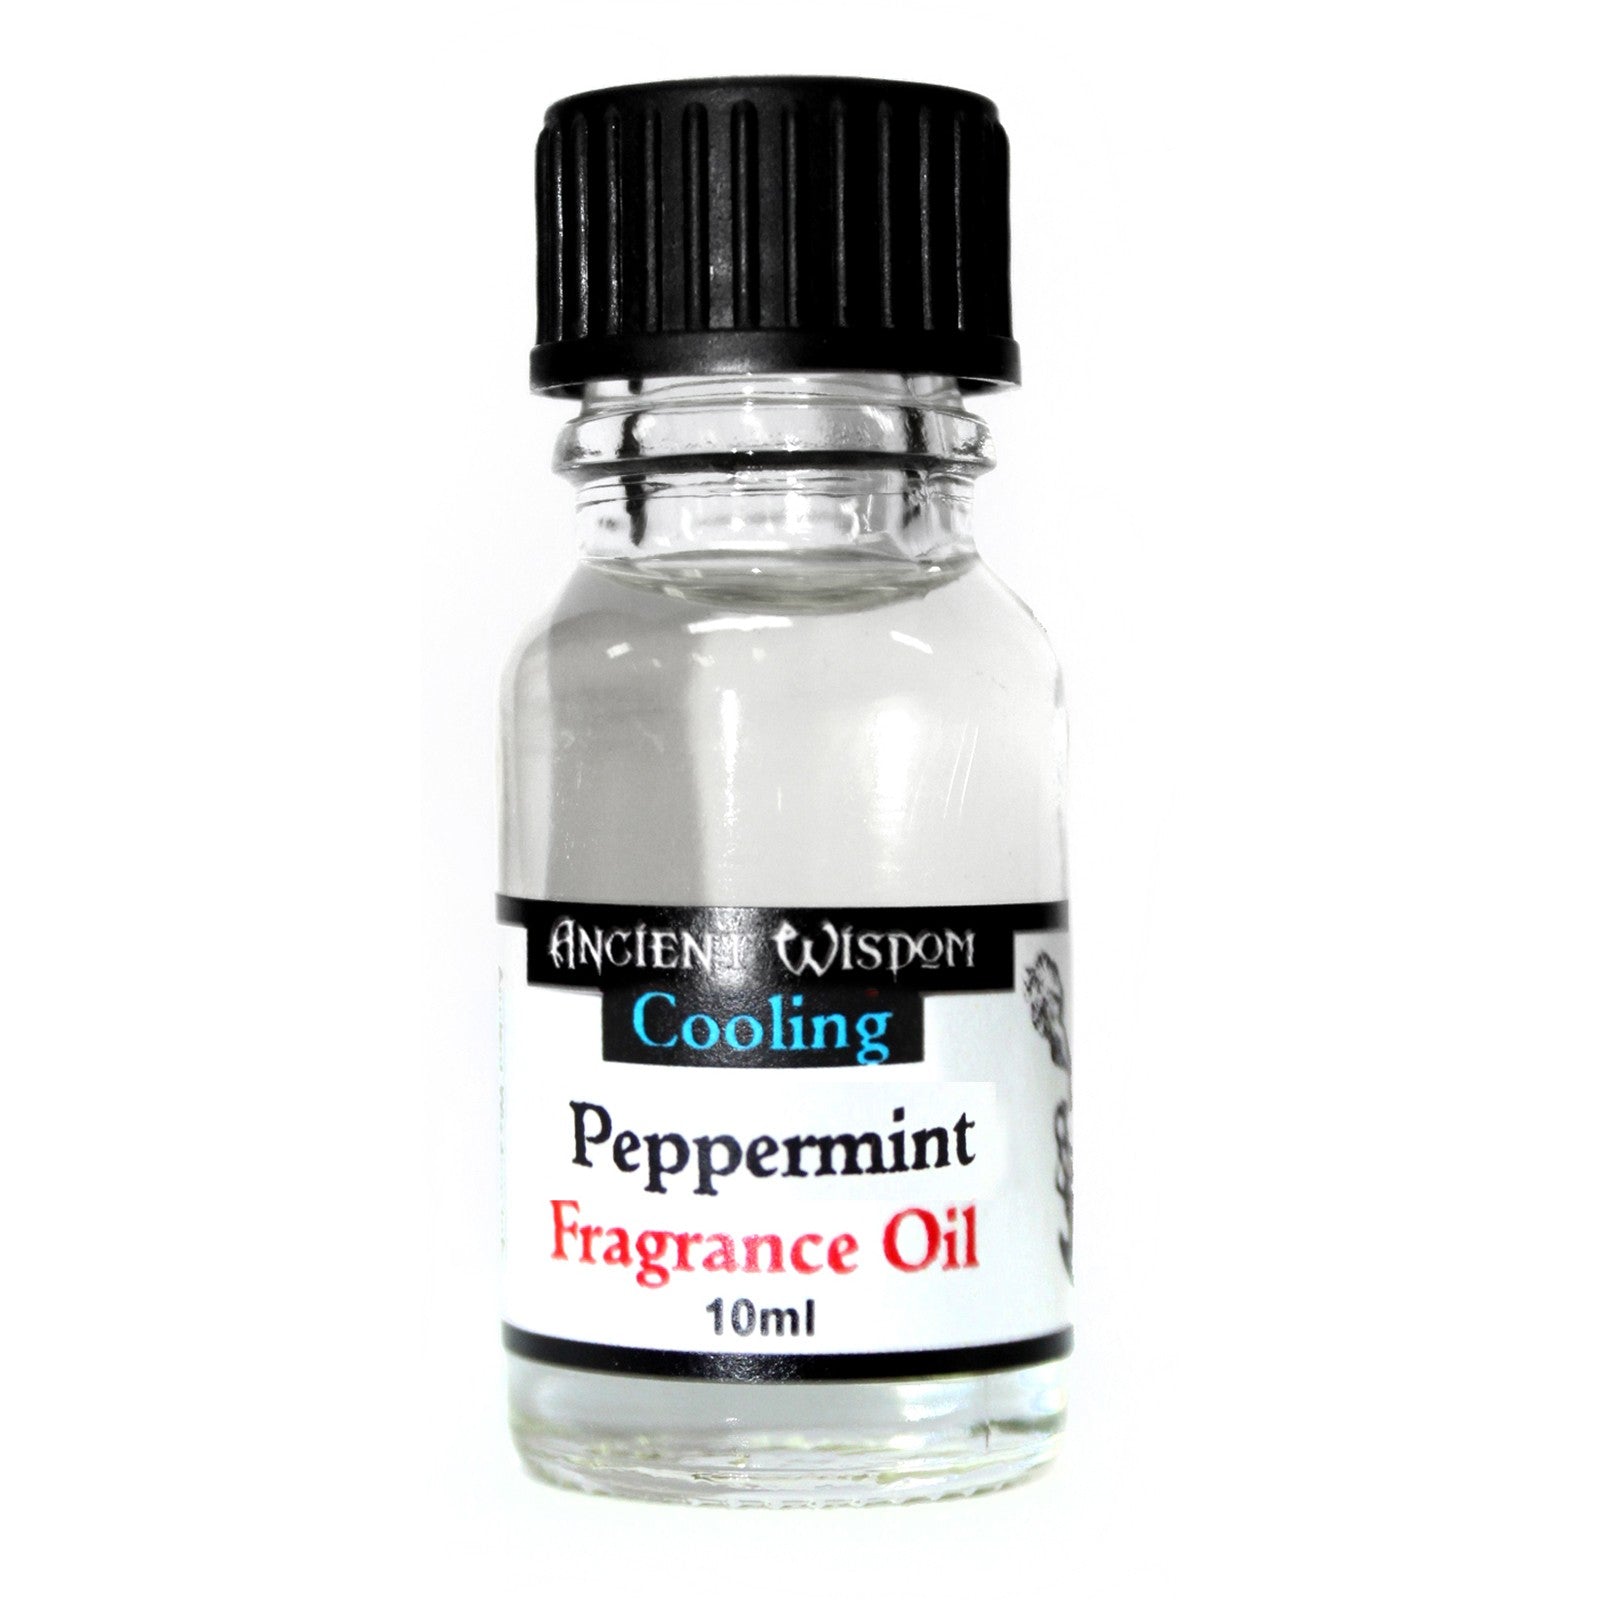 View 10ml Peppermint Fragrance Oil information